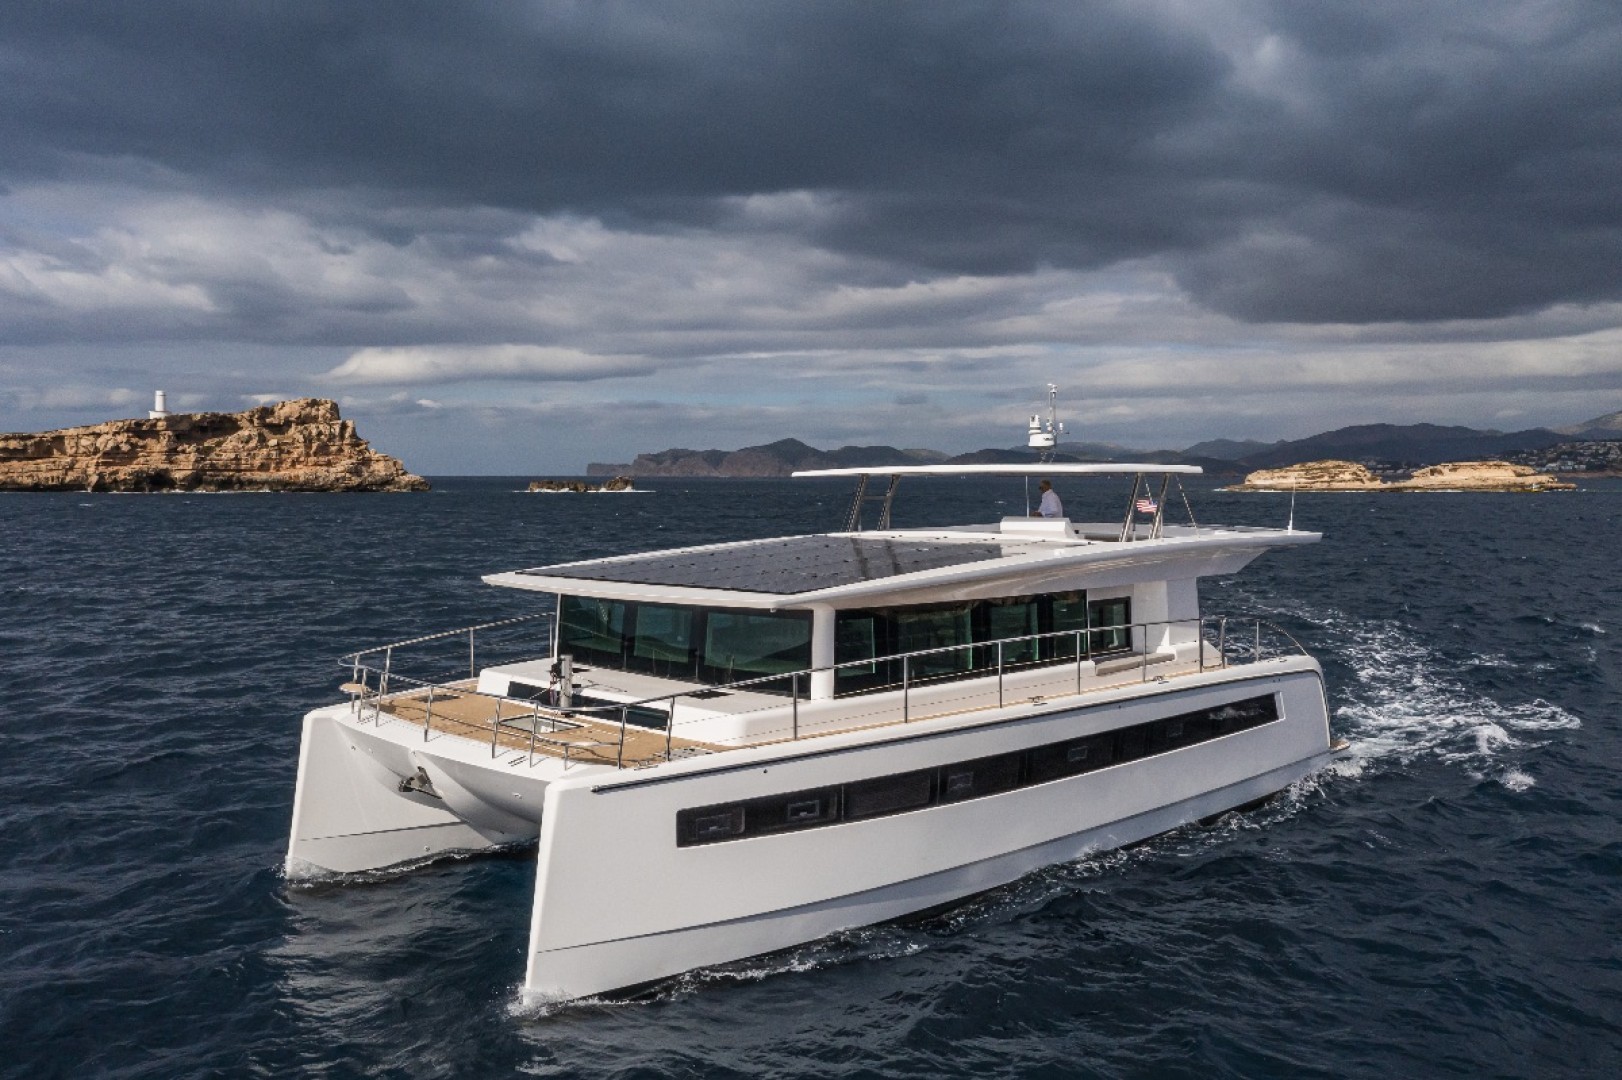 Silent Yachts appoints new exclusive dealer in Asia Pacific